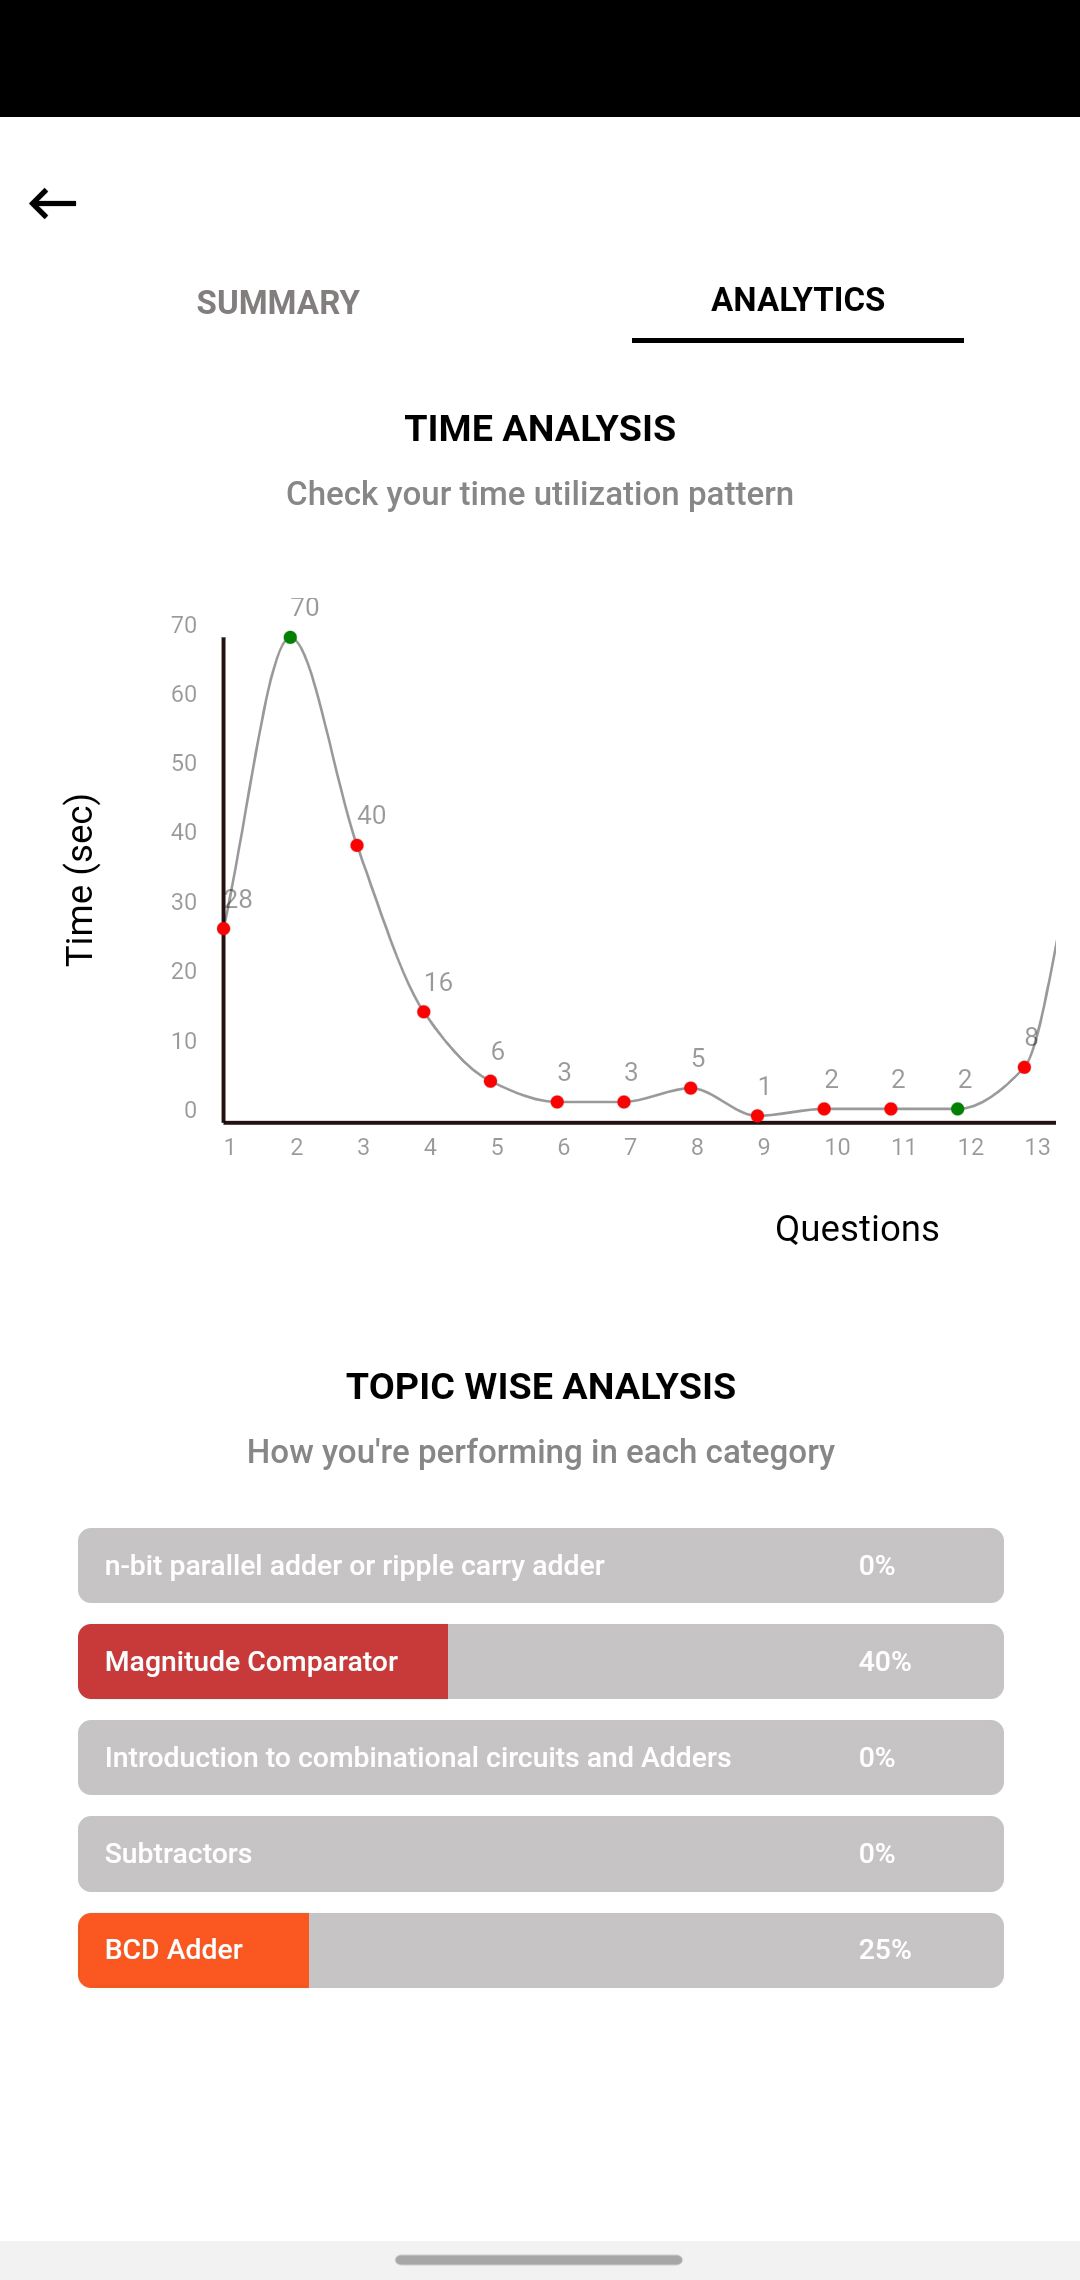 11. To know about time management and topic wise analytics tap on the ”Analytics” tab.